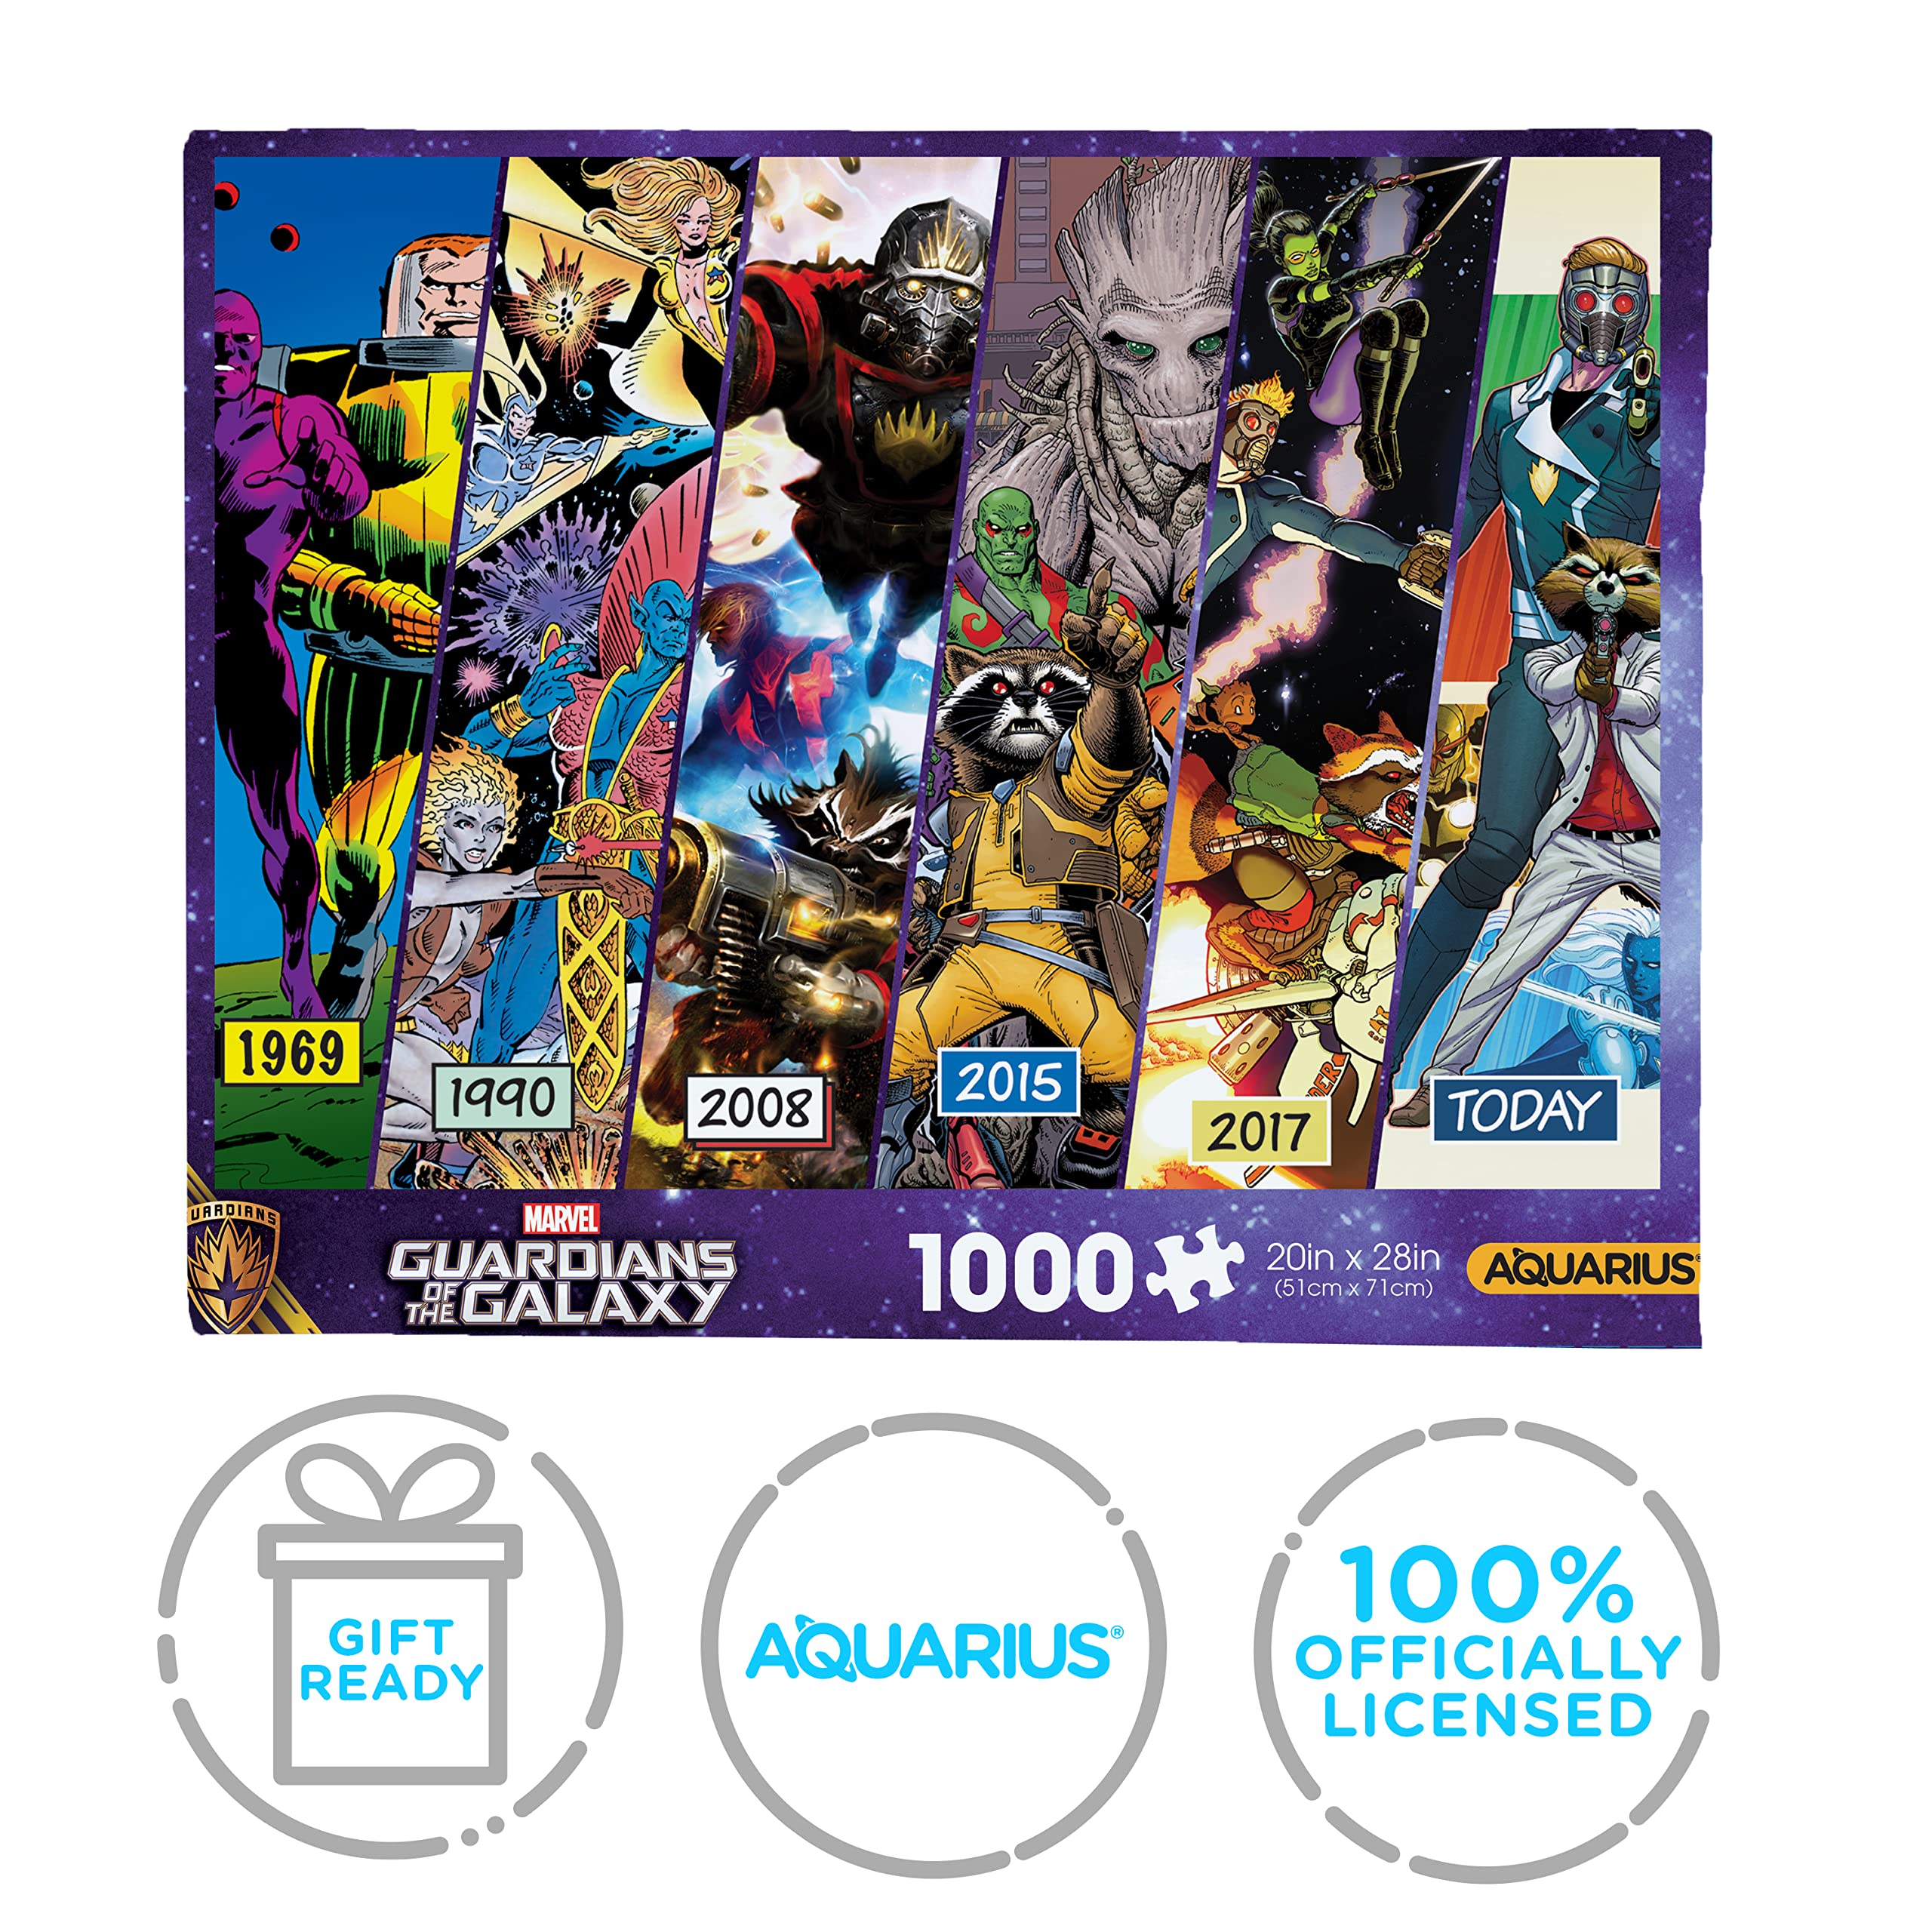 AQUARIUS Guardians of The Galaxy Timeline Puzzle (1000 Piece Jigsaw Puzzle) - Glare Free - Precision Fit - Virtually No Puzzle Dust - Officially Licensed Marvel Merchandise & Collectibles - 20x27 in